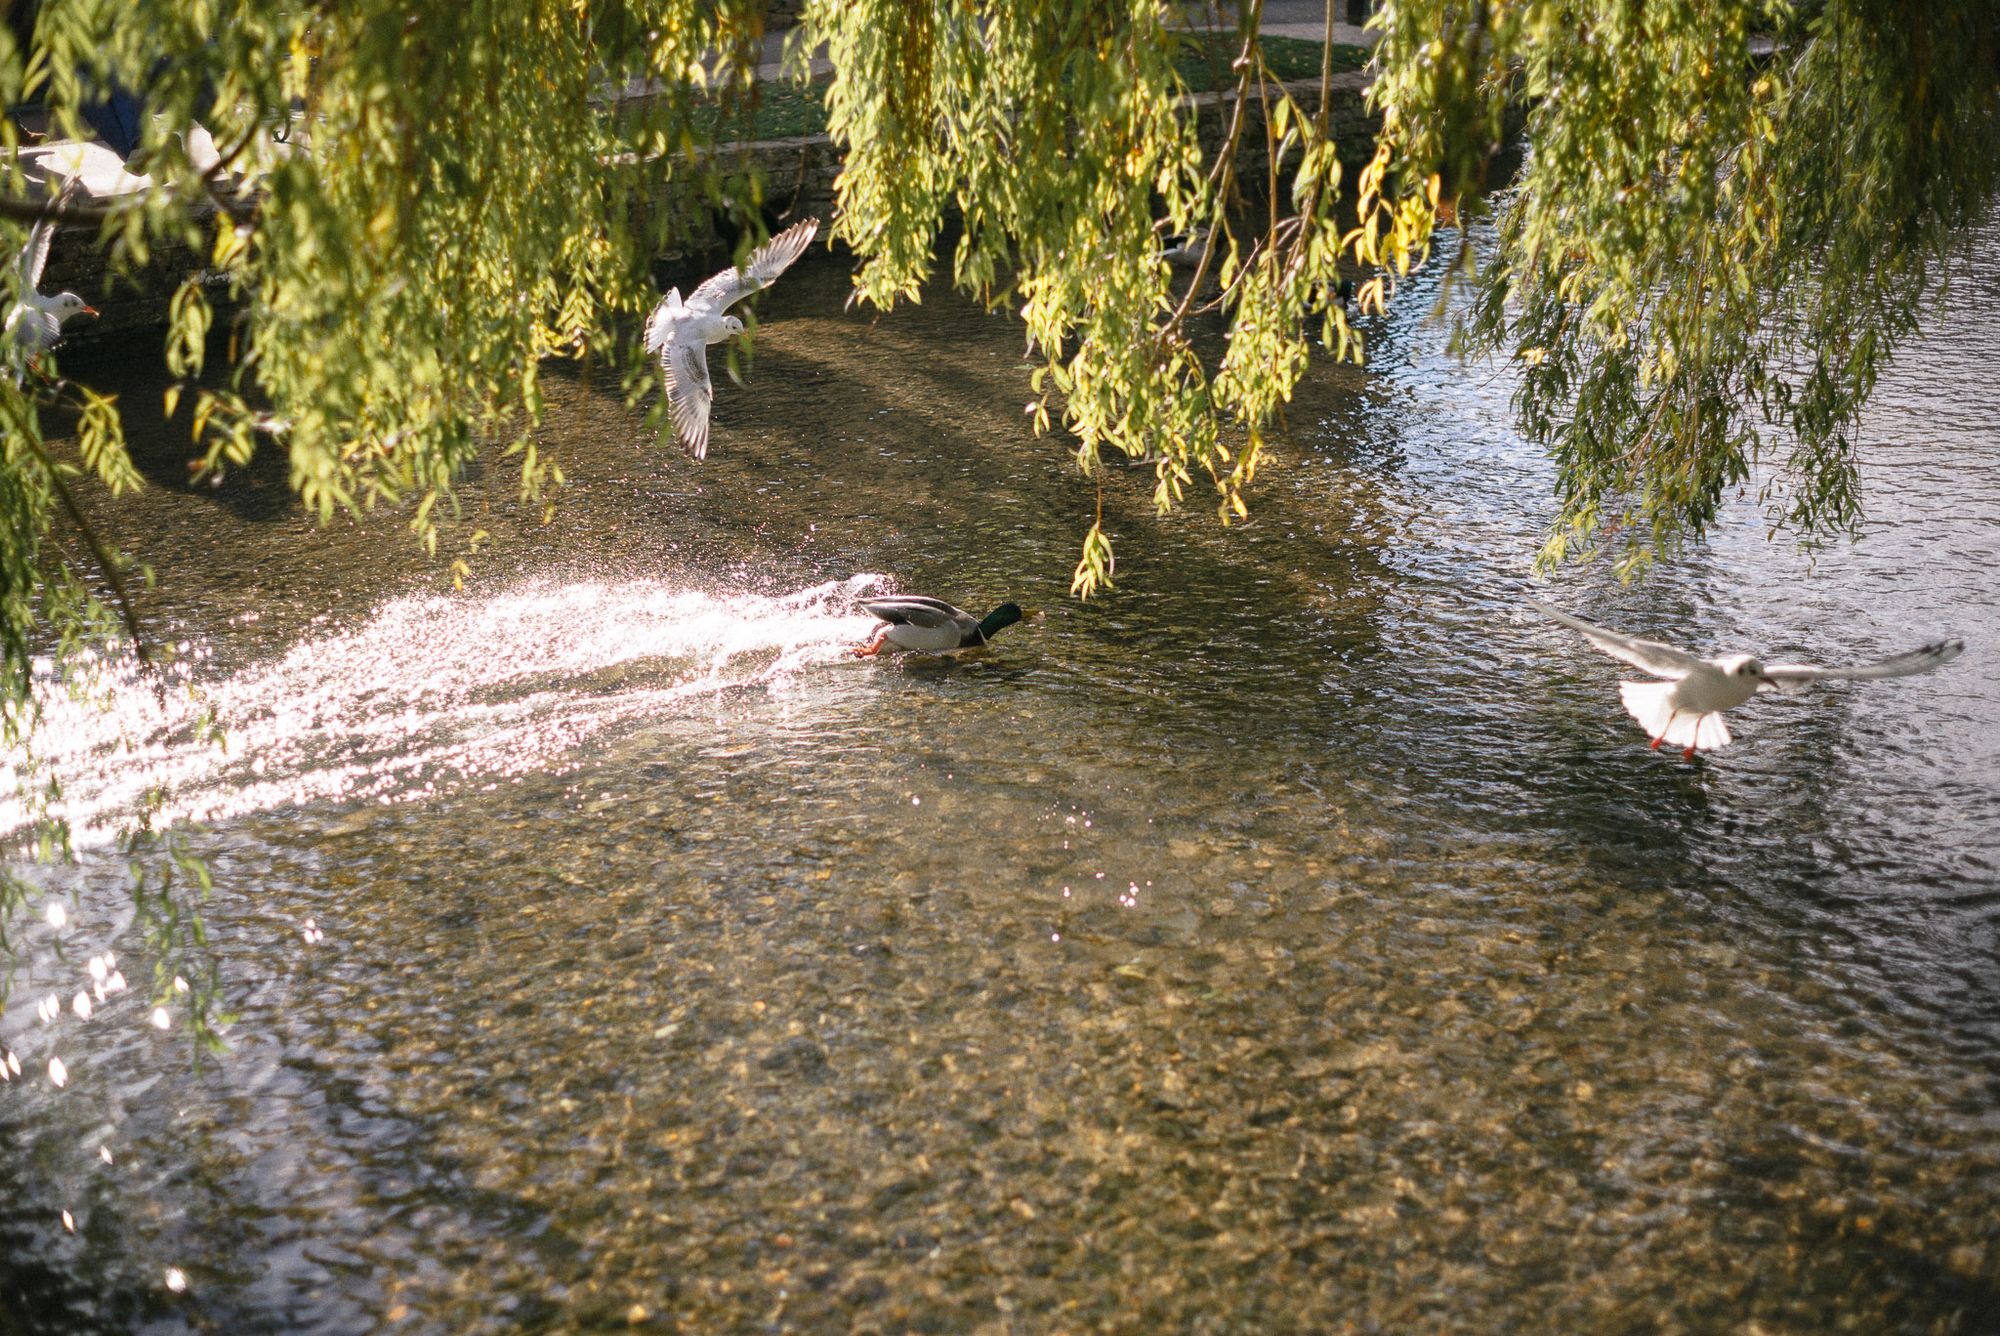 A duck lands on a river while seagulls fly around a willow tree.